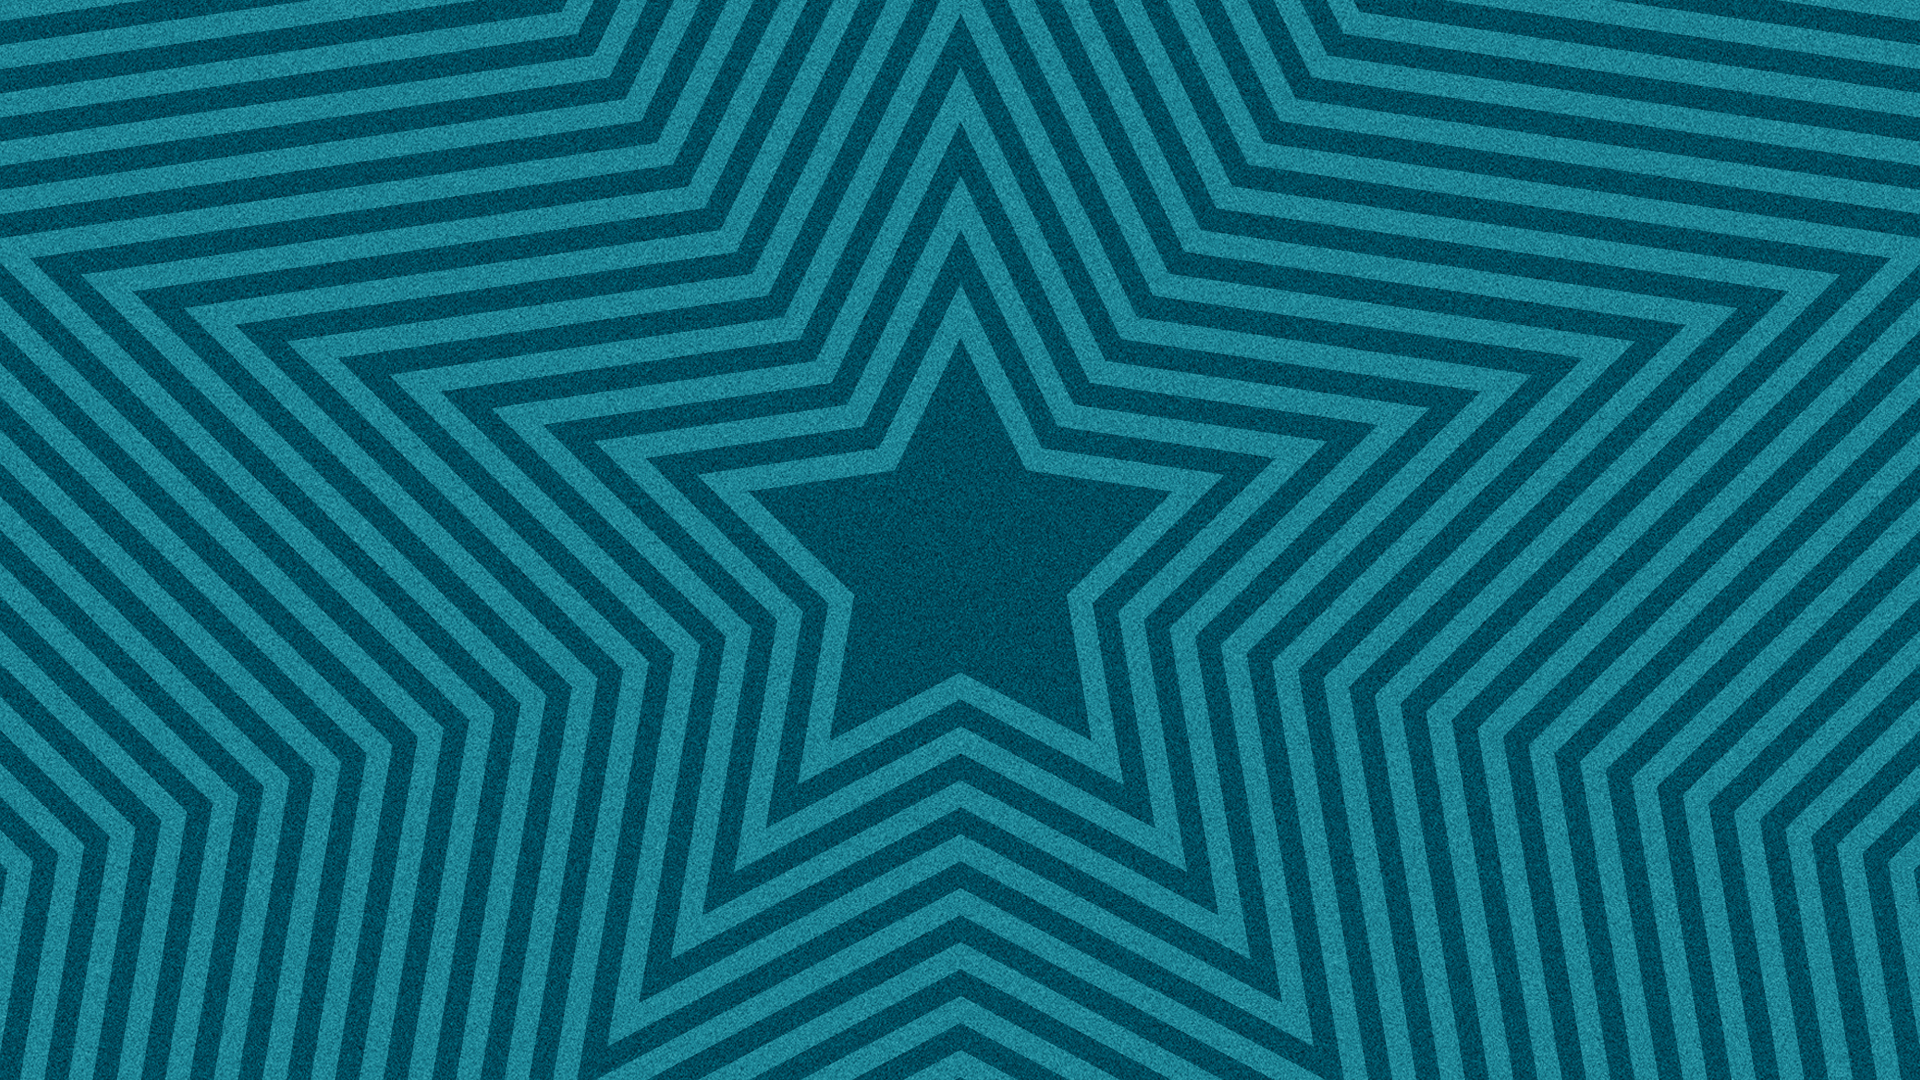 Teal concentric star patterned background